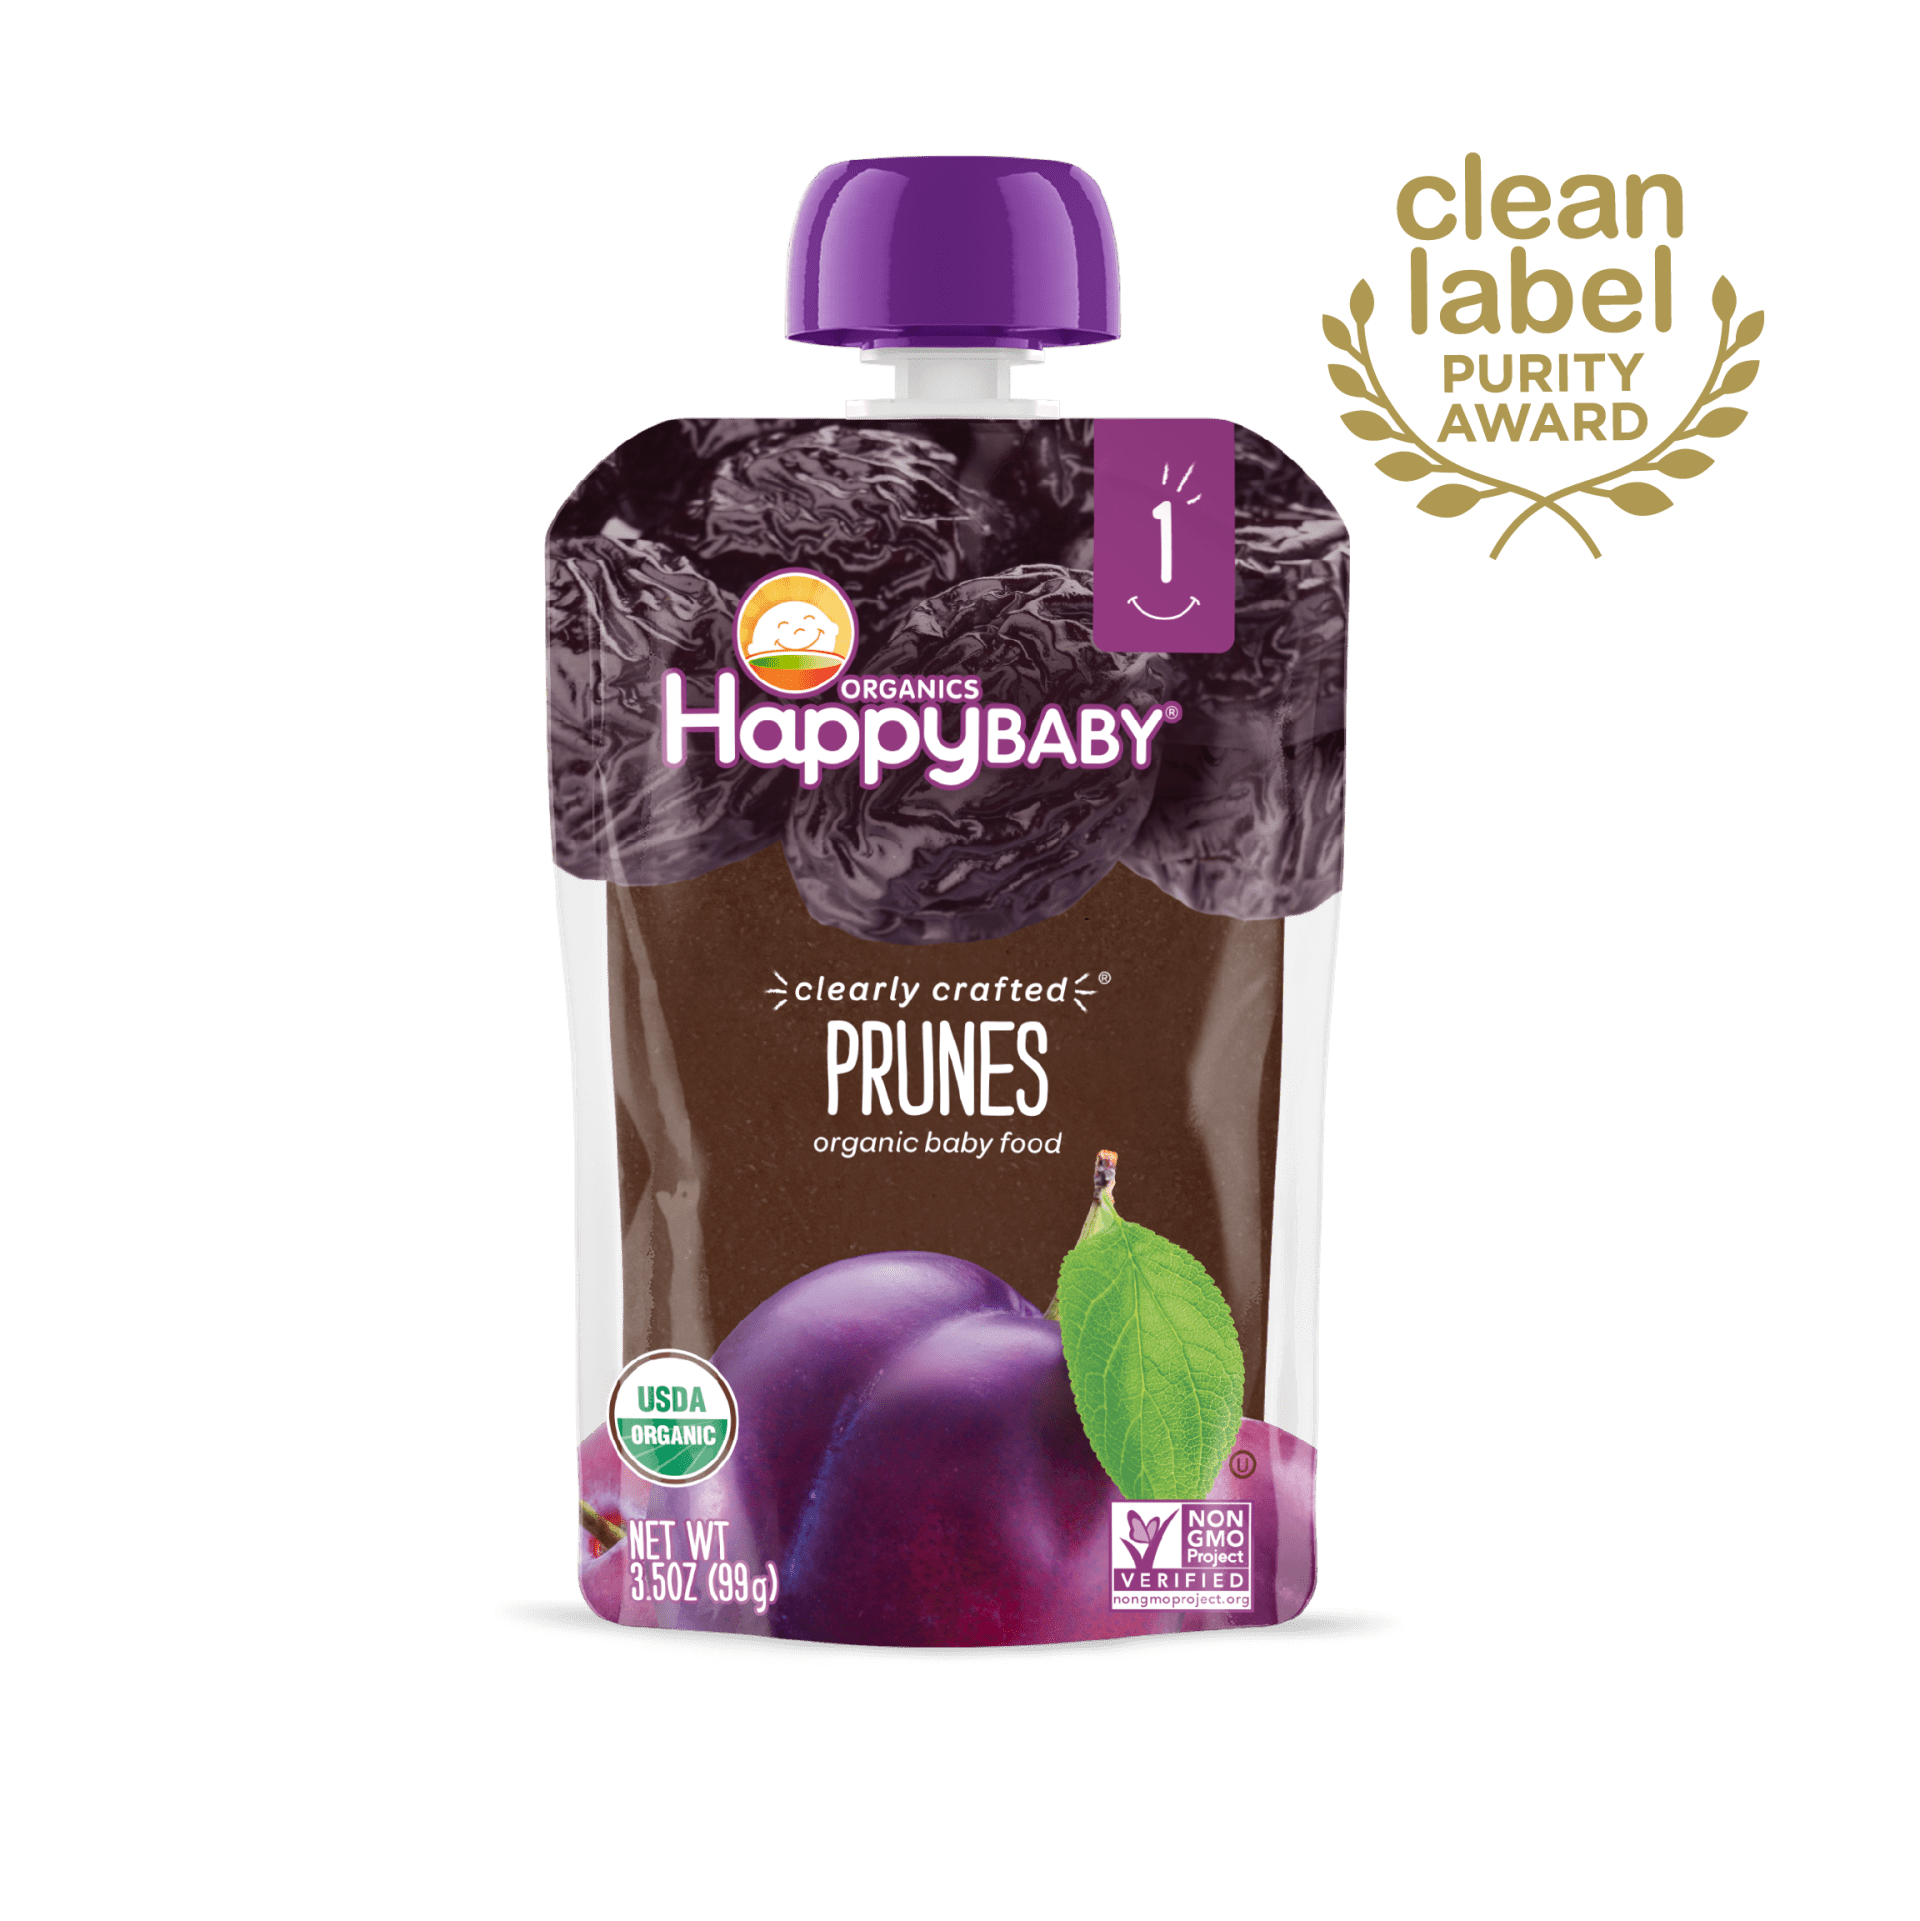 Happy Baby S1 - Clearly Crafted Prunes 3.5Oz pouch 16 units per case 3.5 oz